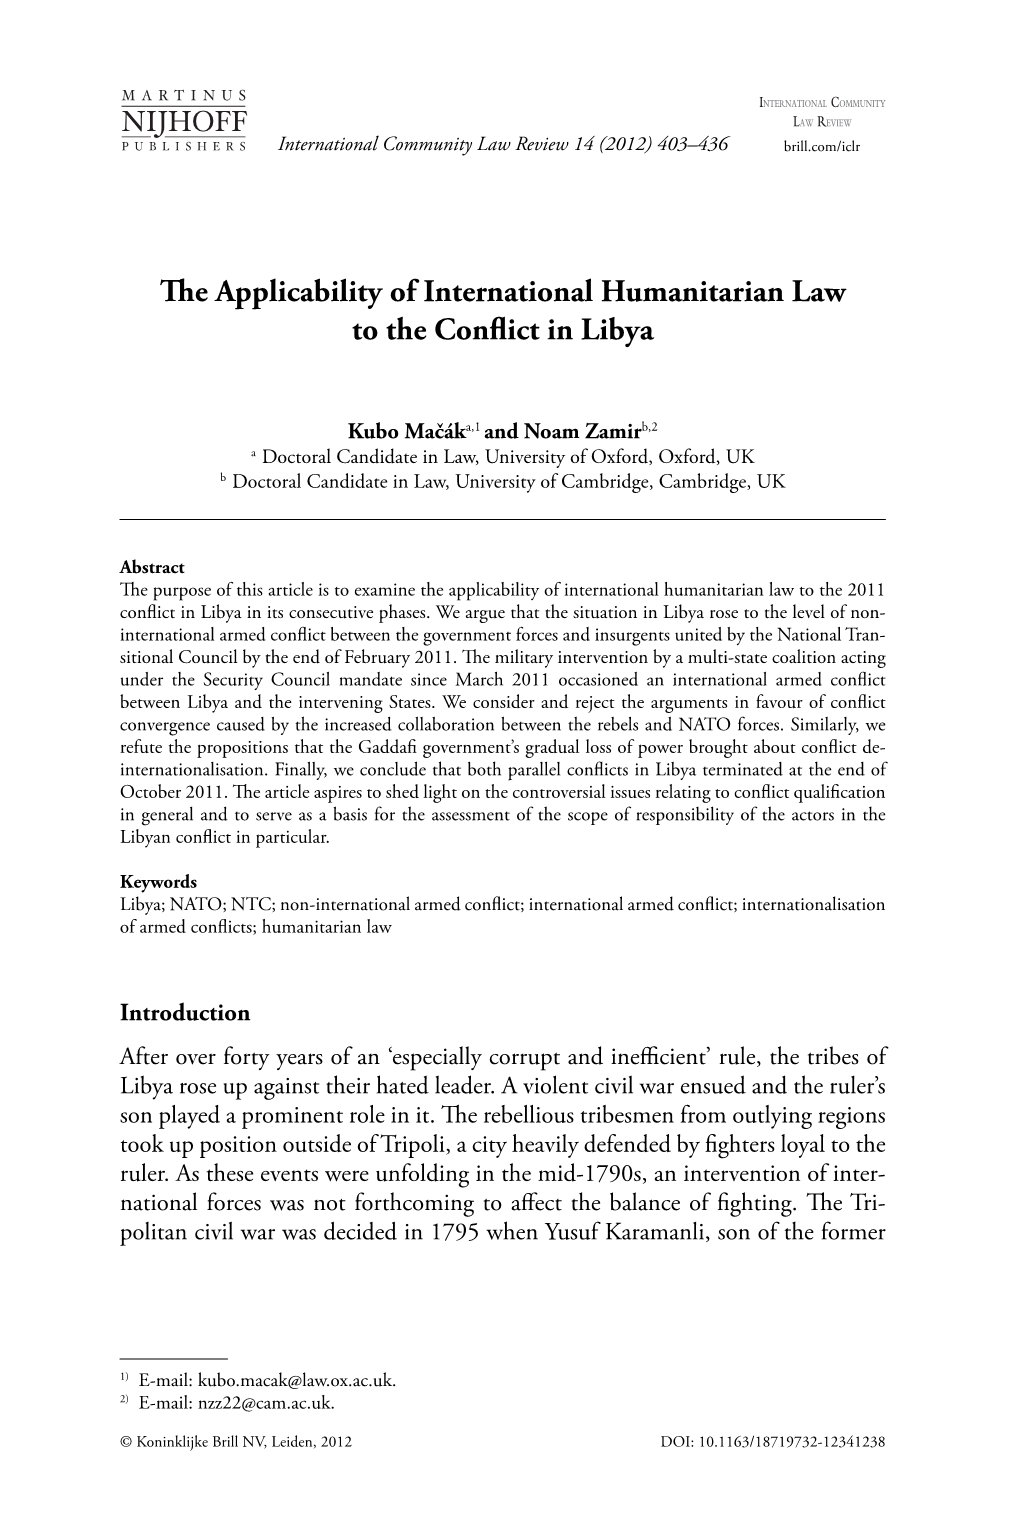 The Applicability of International Humanitarian Law to the Conflict In